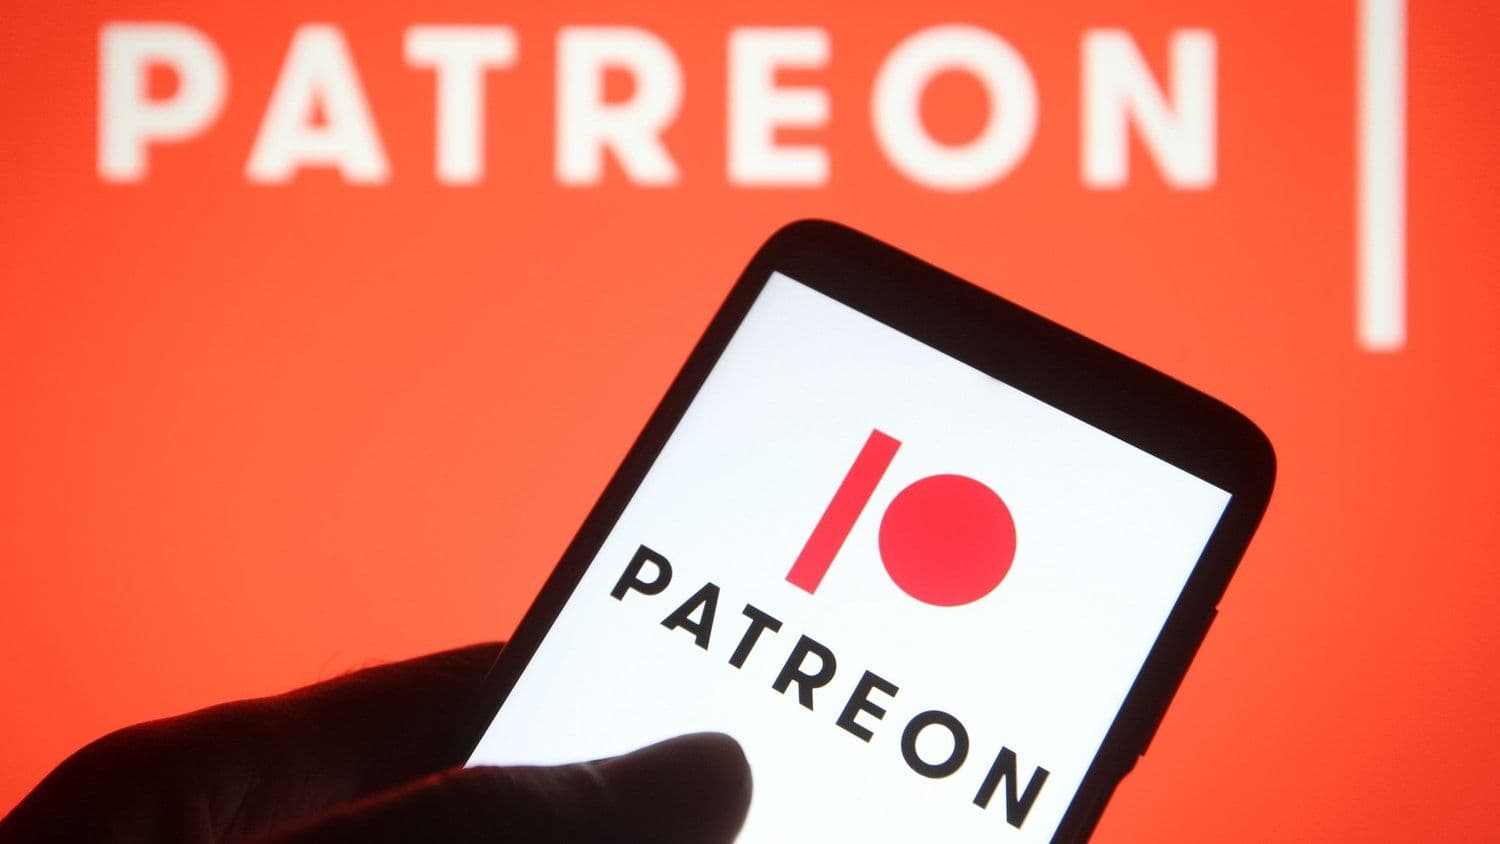 Patreon on a mobile device